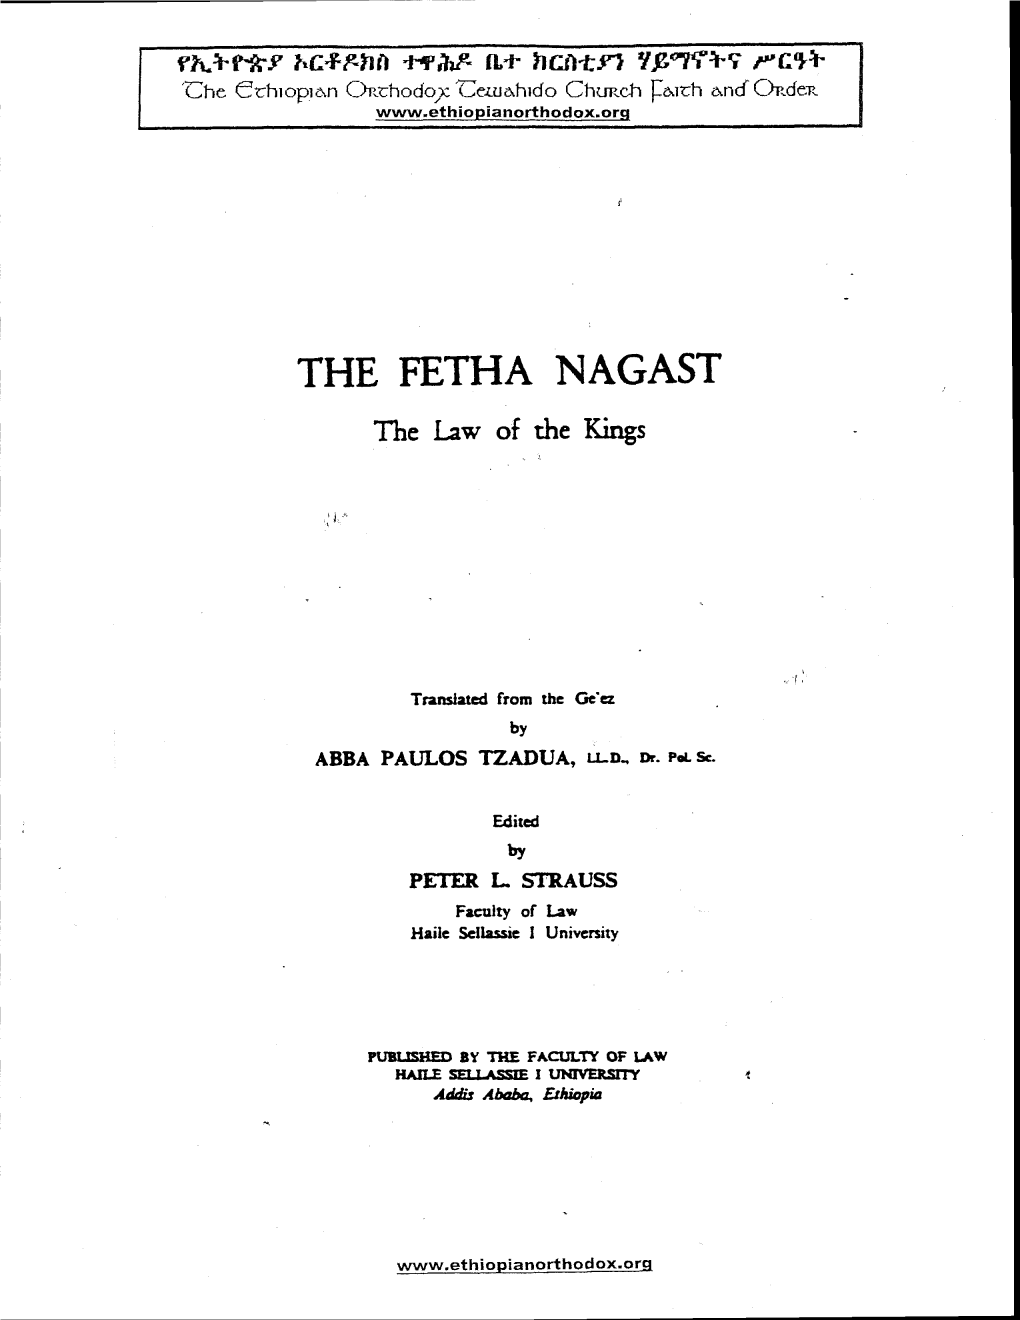 The Fetha Nagast, "The Law of the Kings"